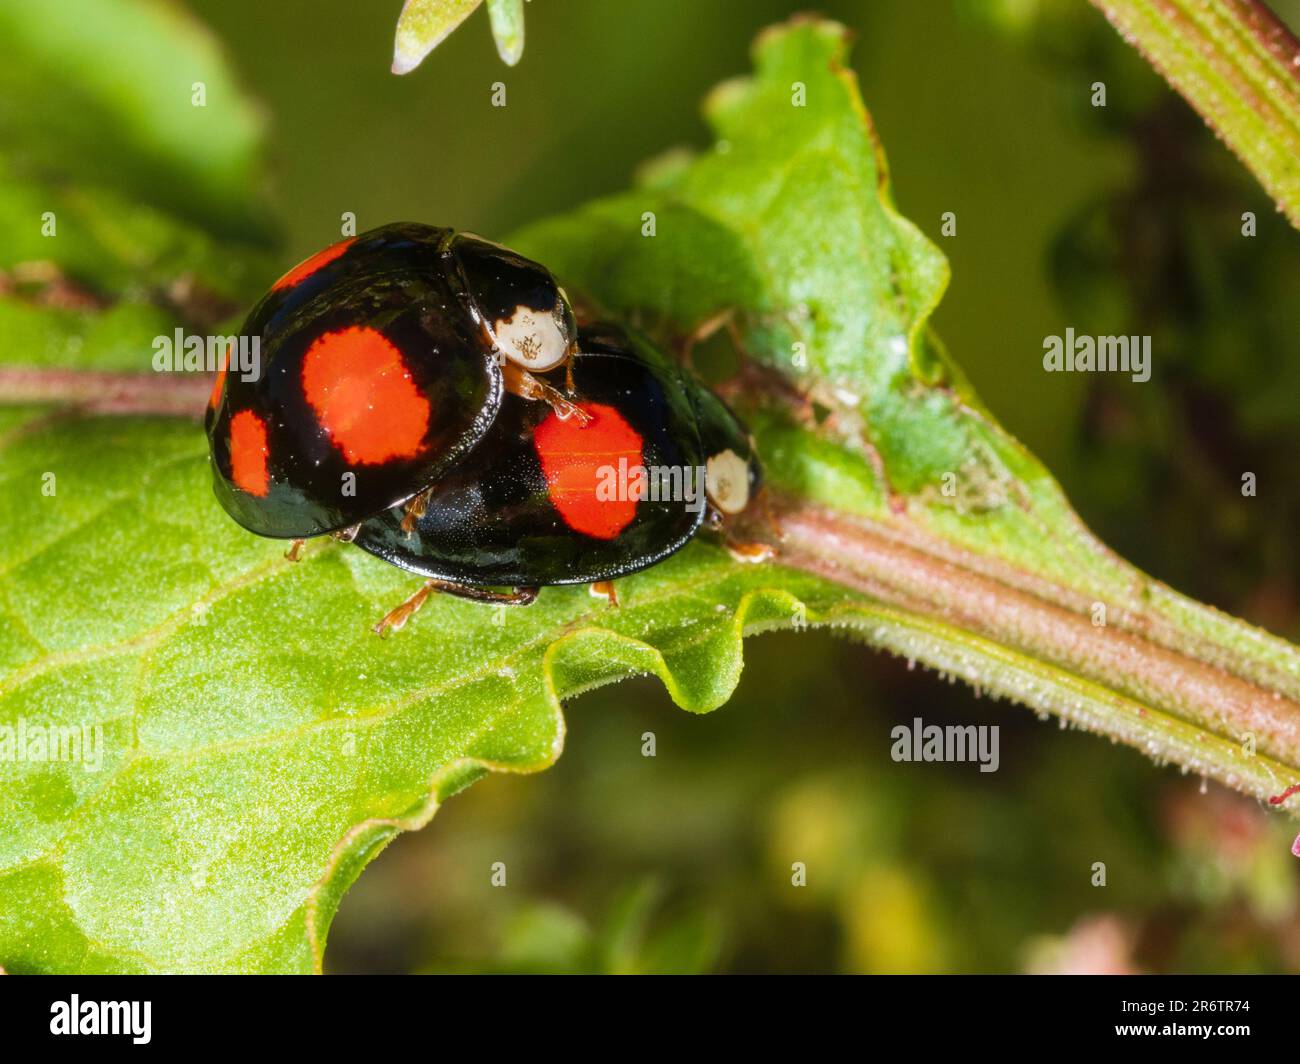 Mated pair of the 4 spotted colour form of the Harlequin ladybird, Harmonia axyridis f. spectabilis in a UK garden Stock Photo